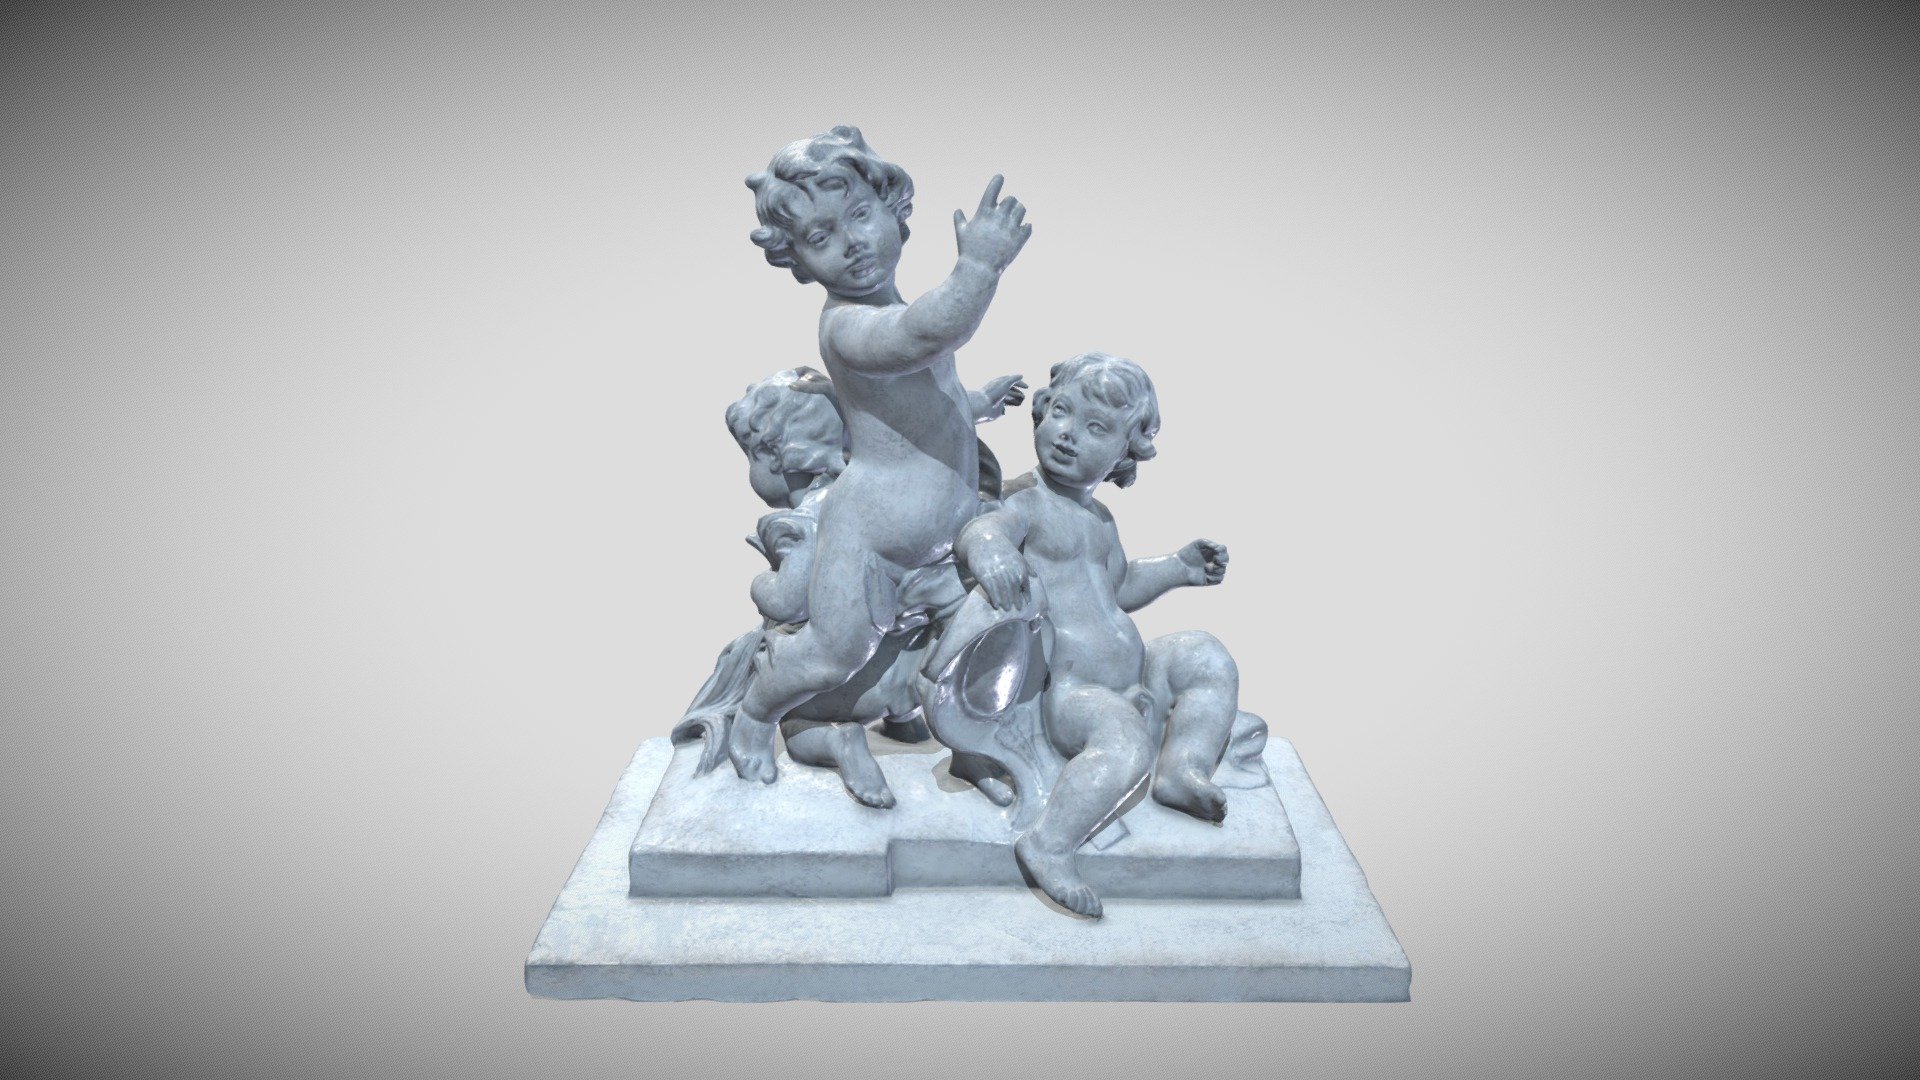 Original very nice 3D Scan from https://noe-3d.at/

here the Painted Gaming Version LR... 3d model